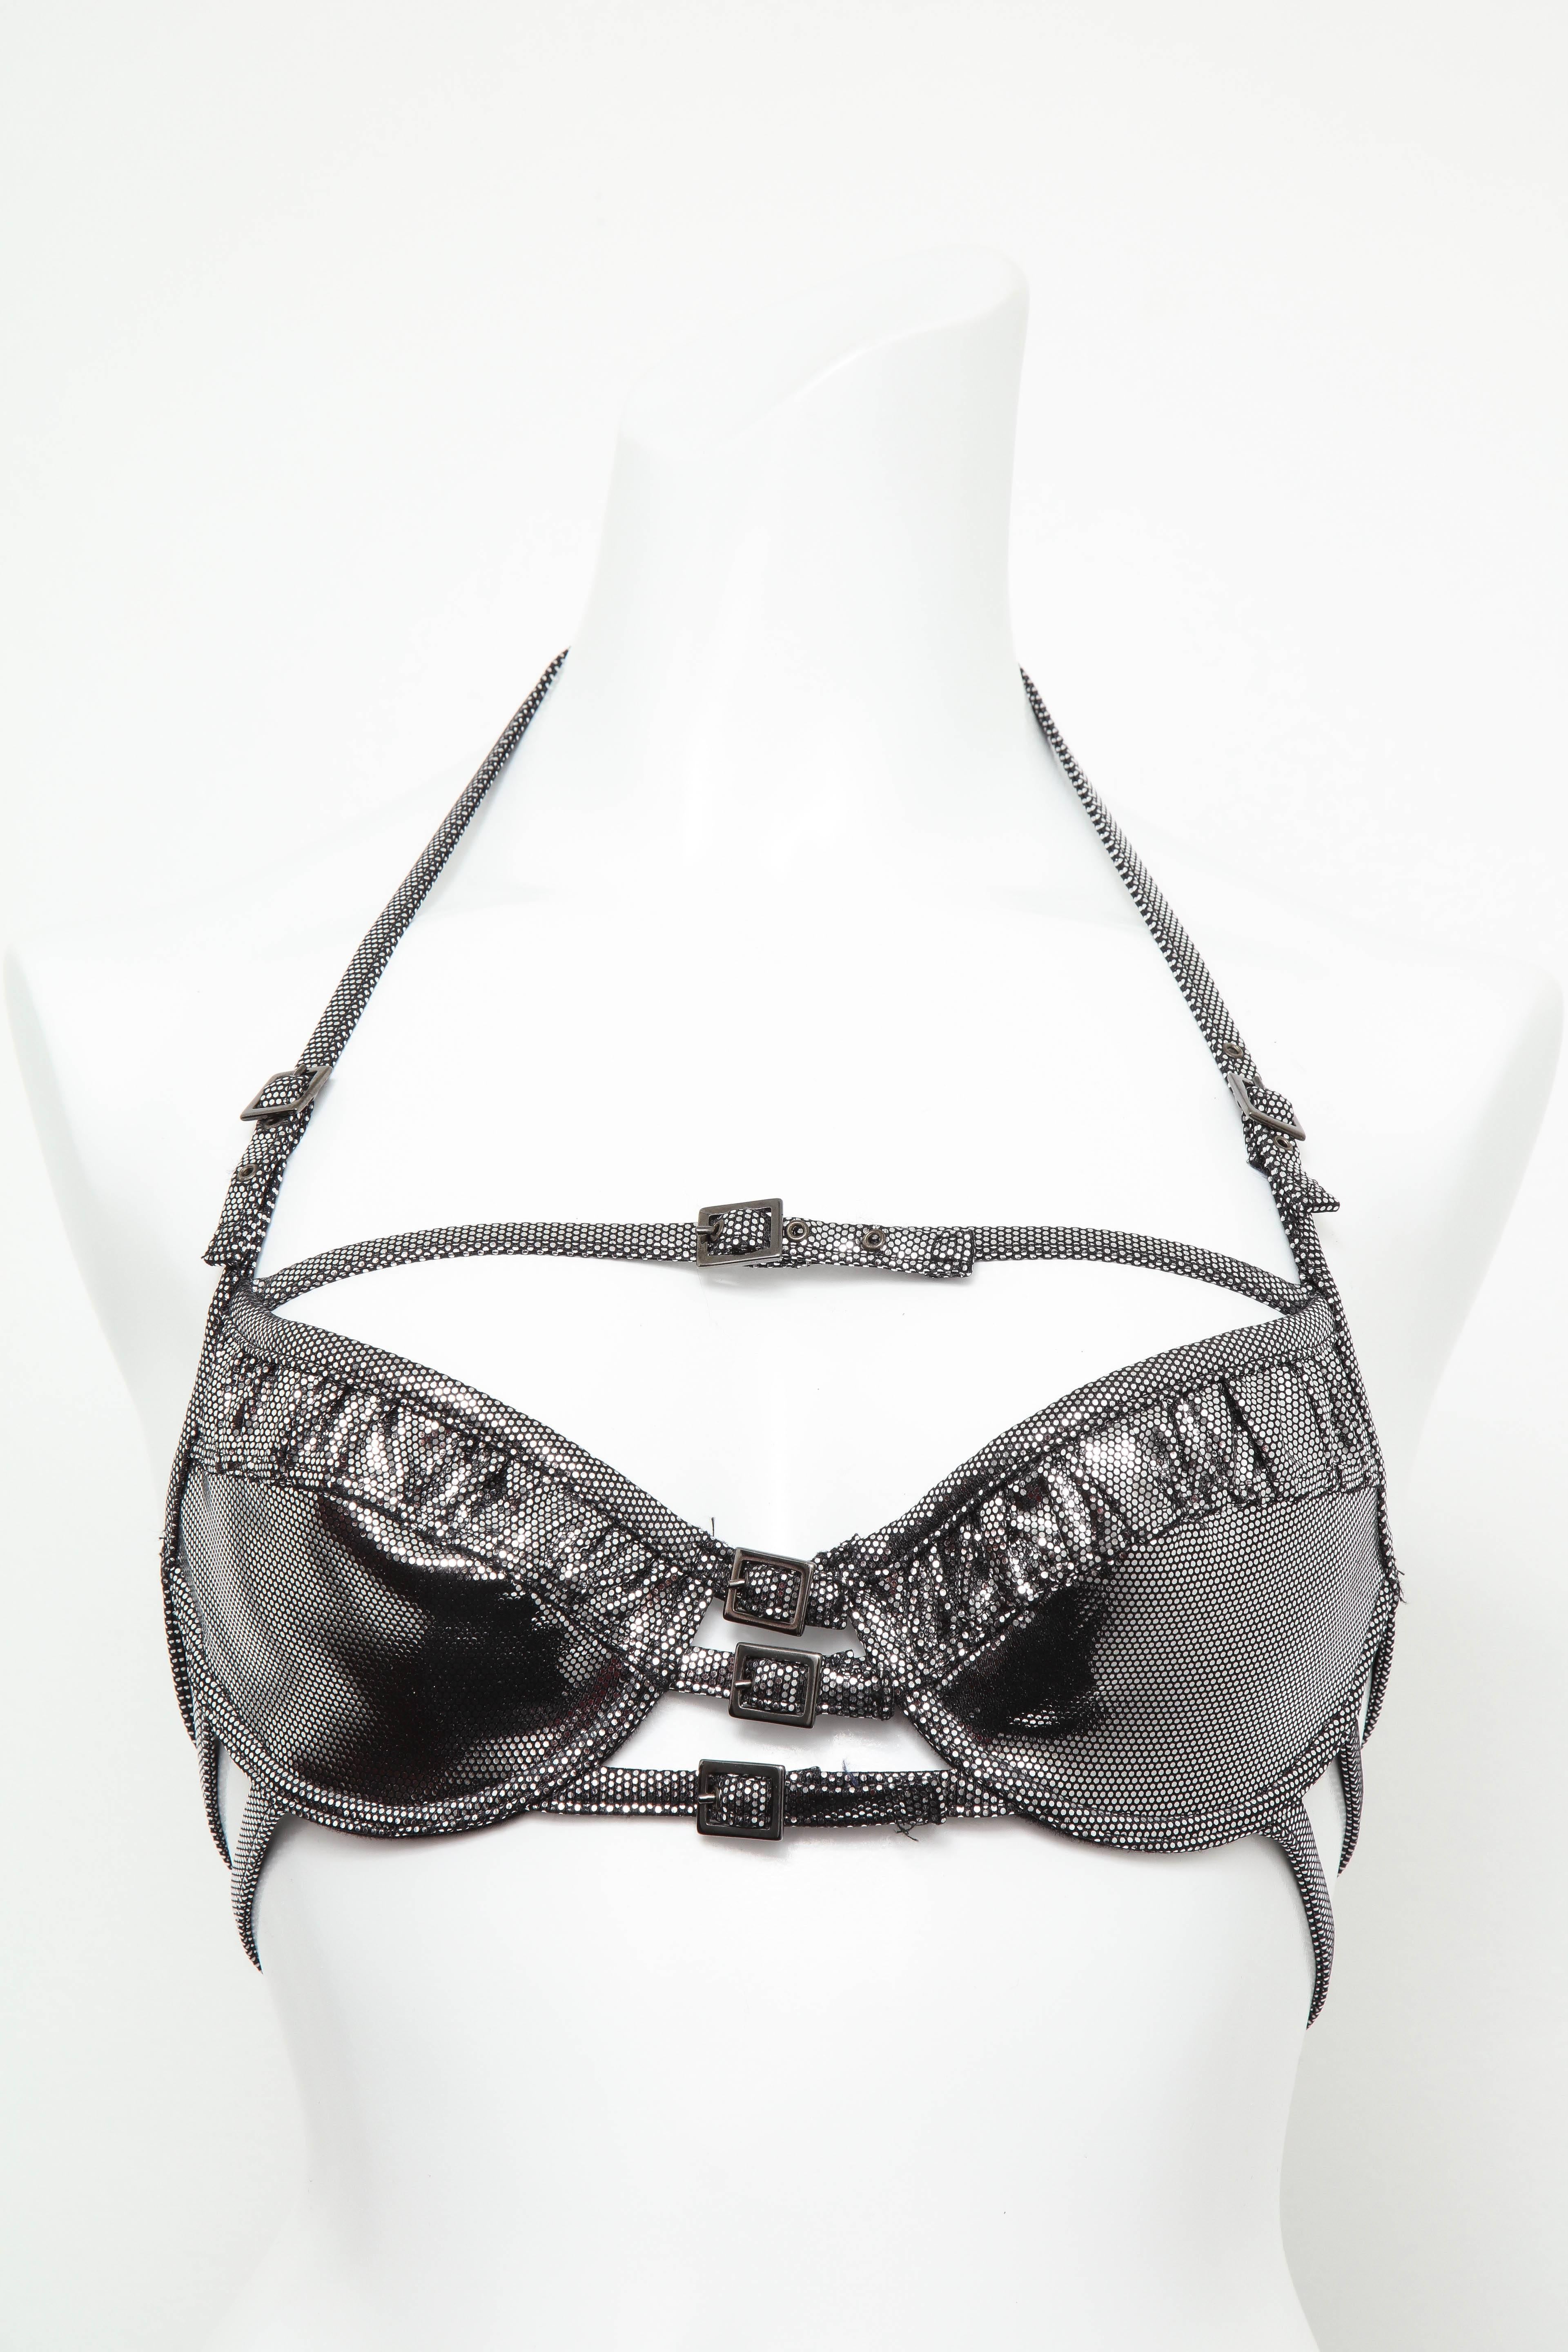 Gorgeous John Galliano for Christian Dior silver bikini with belts. Featured in Dior ad. 

FR Size 38